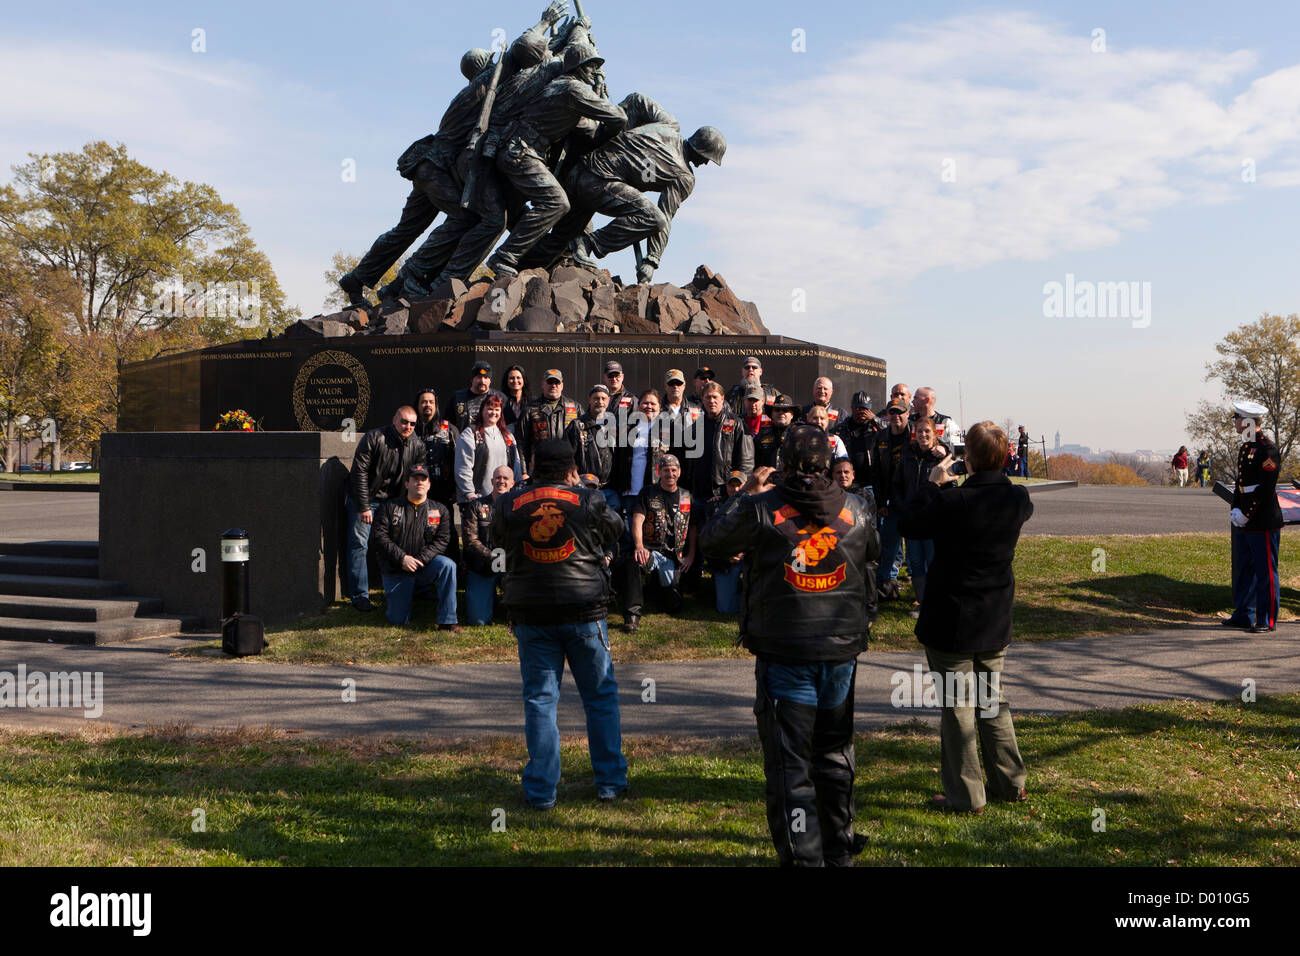 Band of Brothers USMC motorcycle riding club members pose for a picture in front of the Marine Corps Memorial Stock Photo